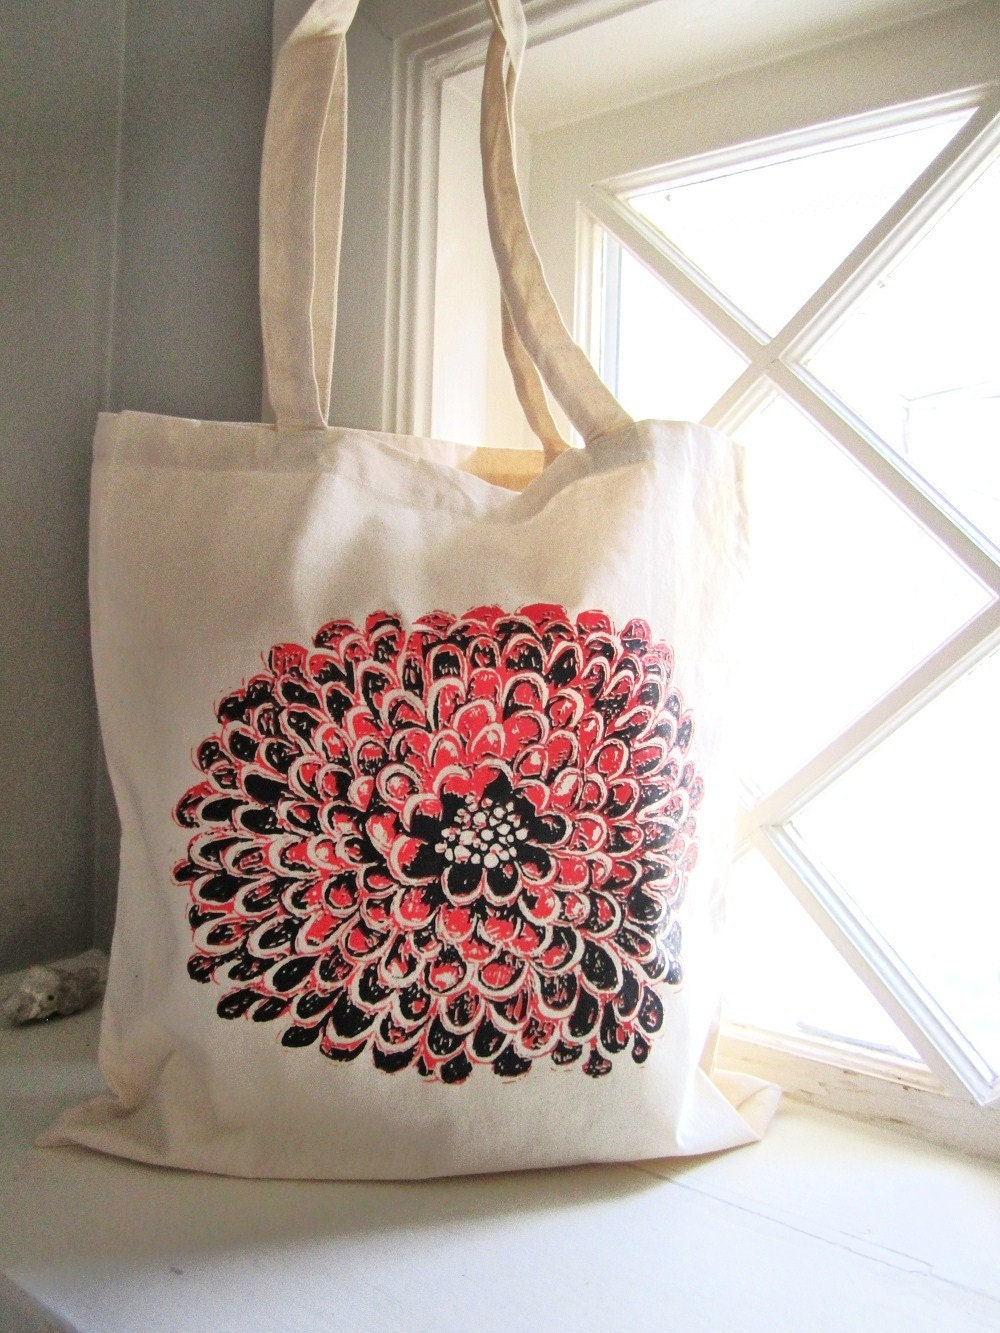 Flower Tote Bag Screenprint Tote Floral Tote Red and